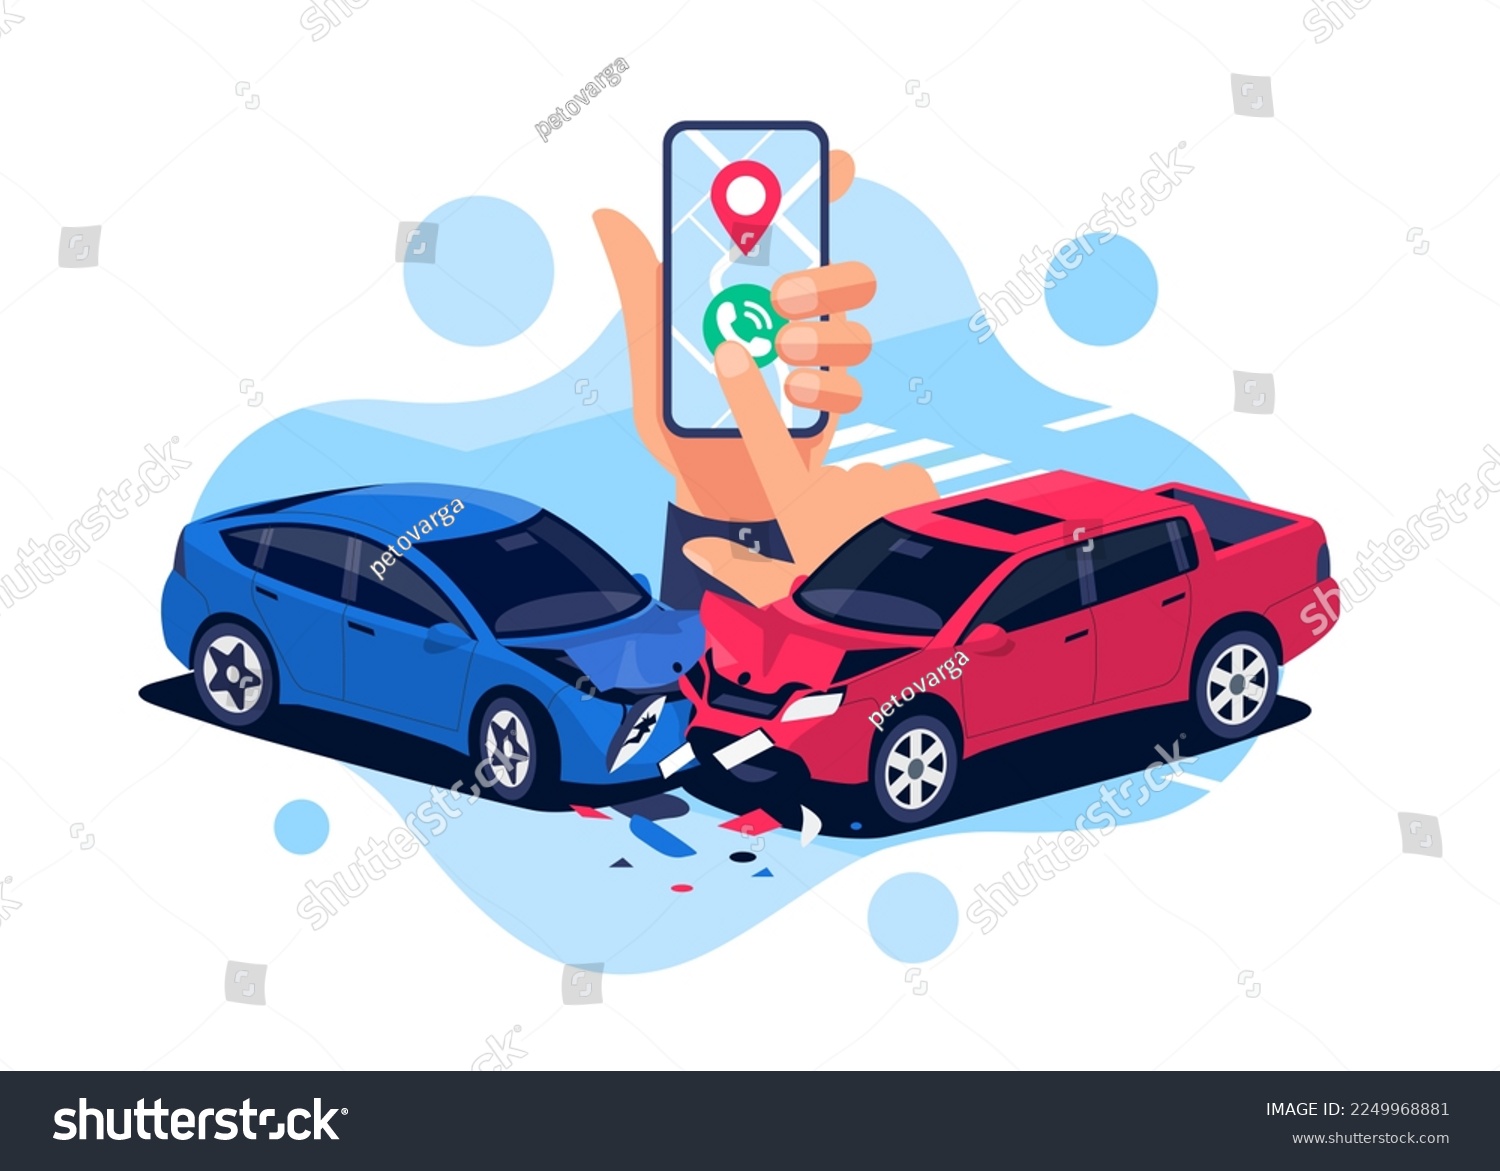 SVG of Car crash with urgent phone call. Smartphone in hand calling police help, insurance company. Two damaged vehicles in traffic accident collision on road, crossroad, street. Head-on hit. Isolated vector svg